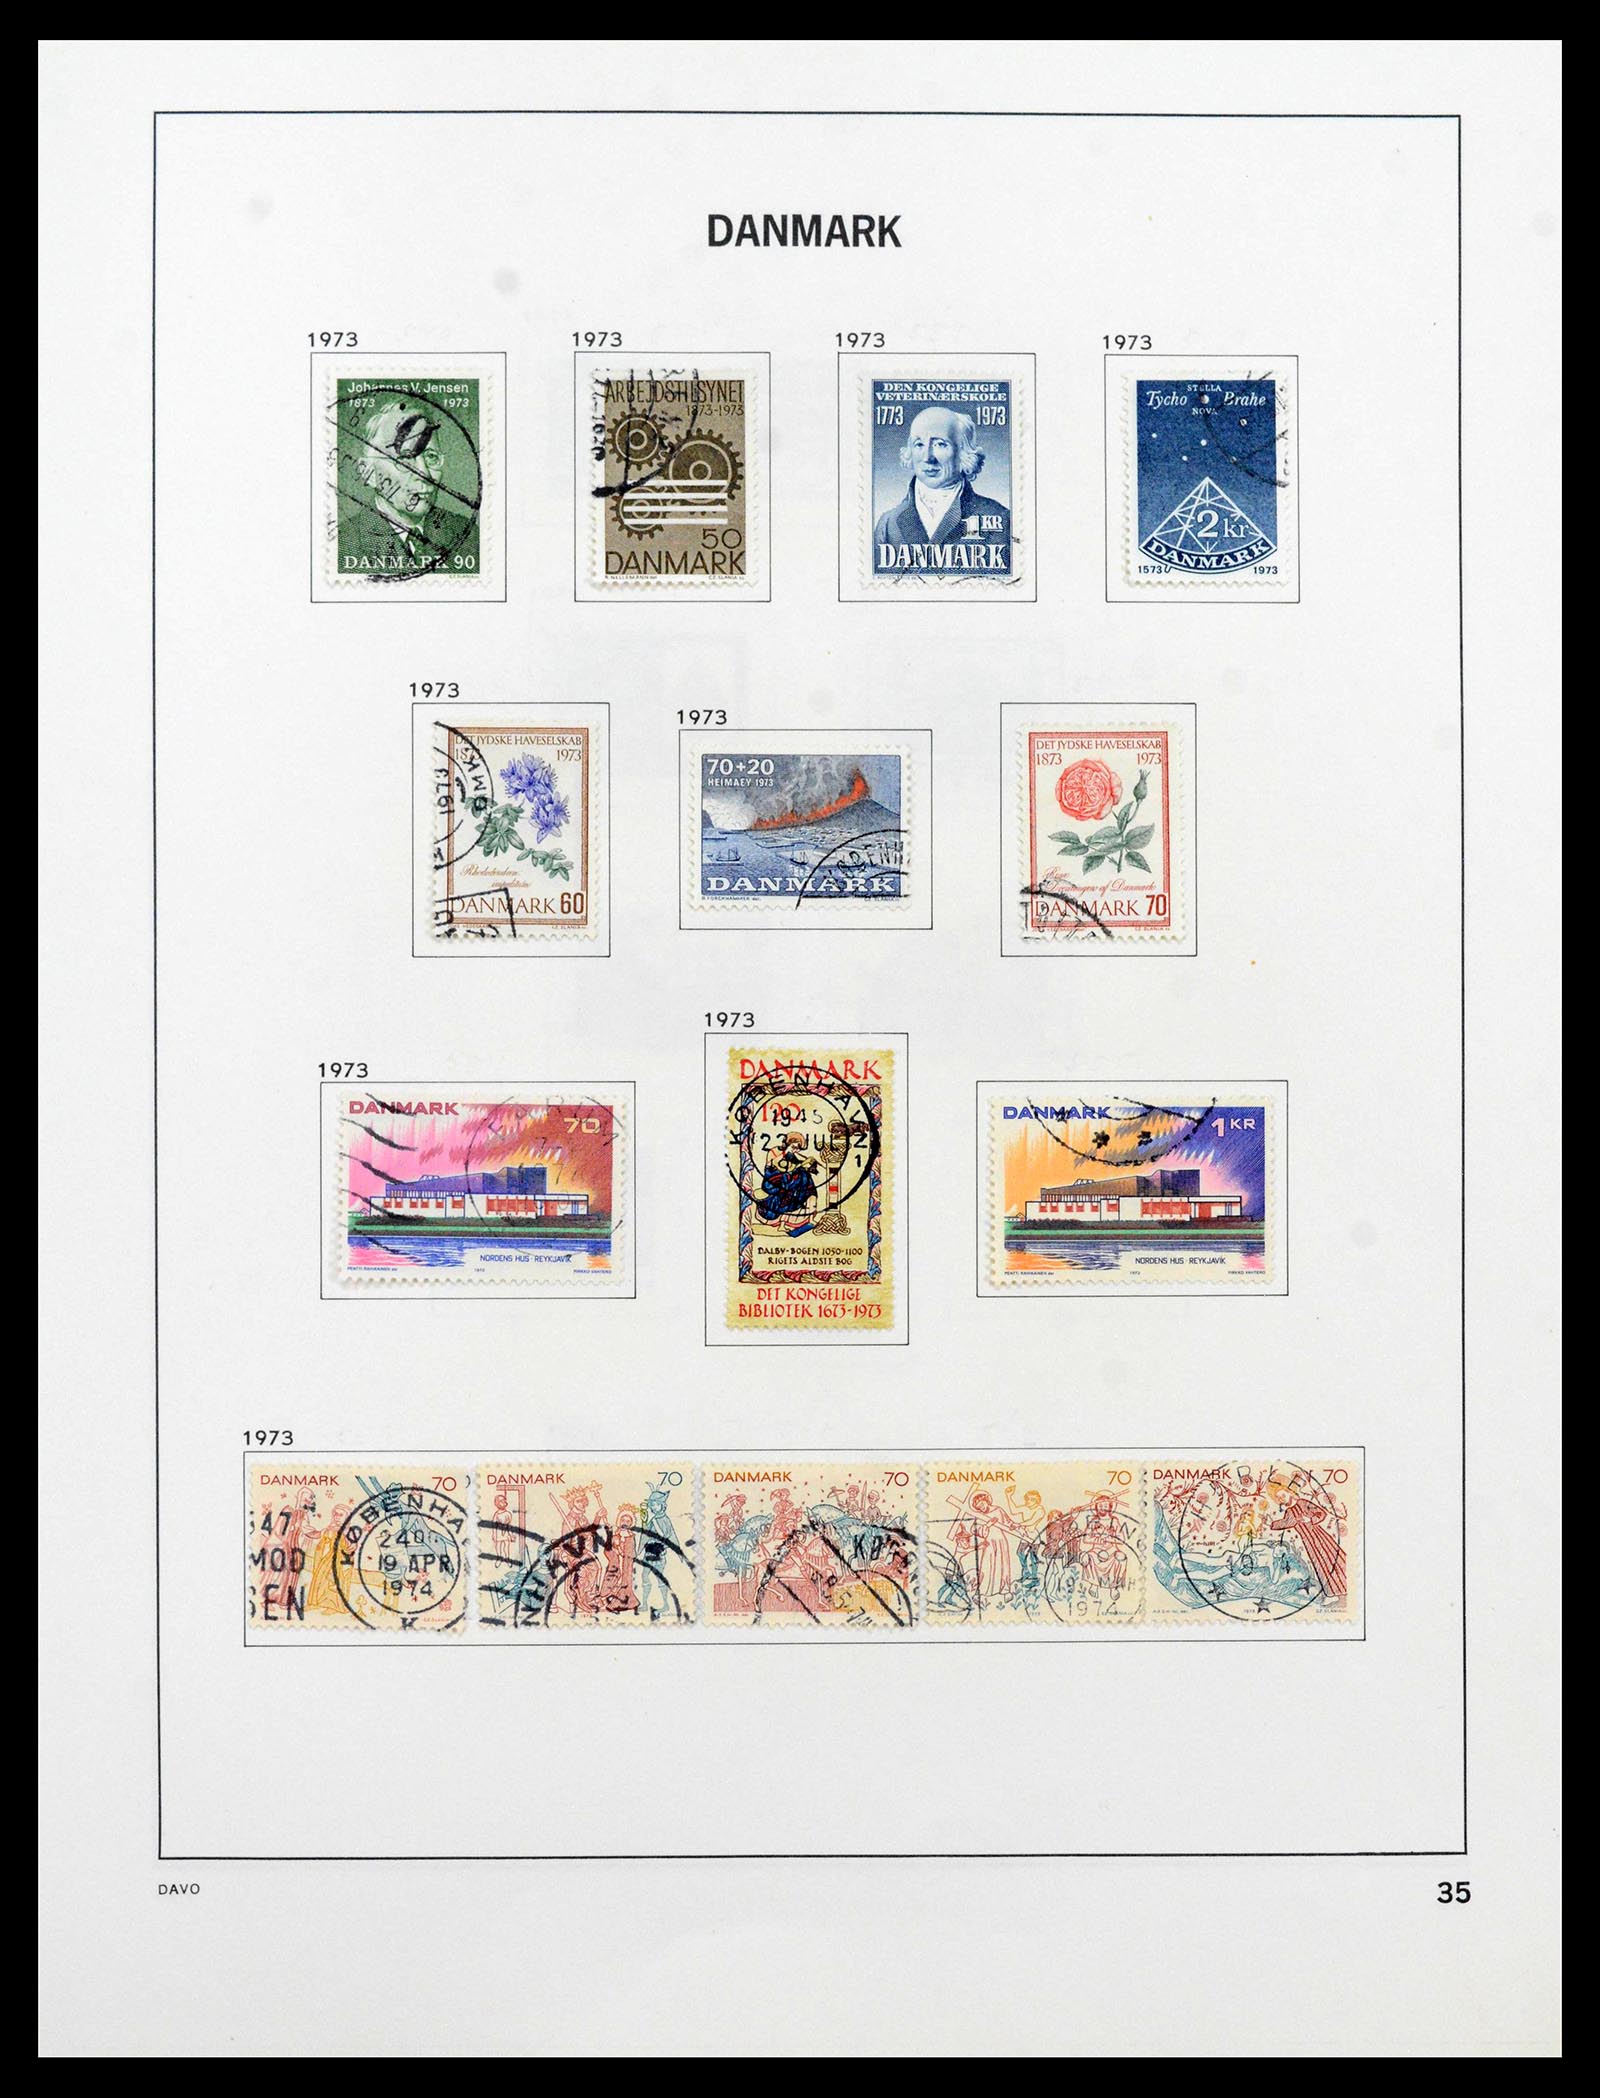 39428 0036 - Stamp collection 39428 Denmark 1851-2019.